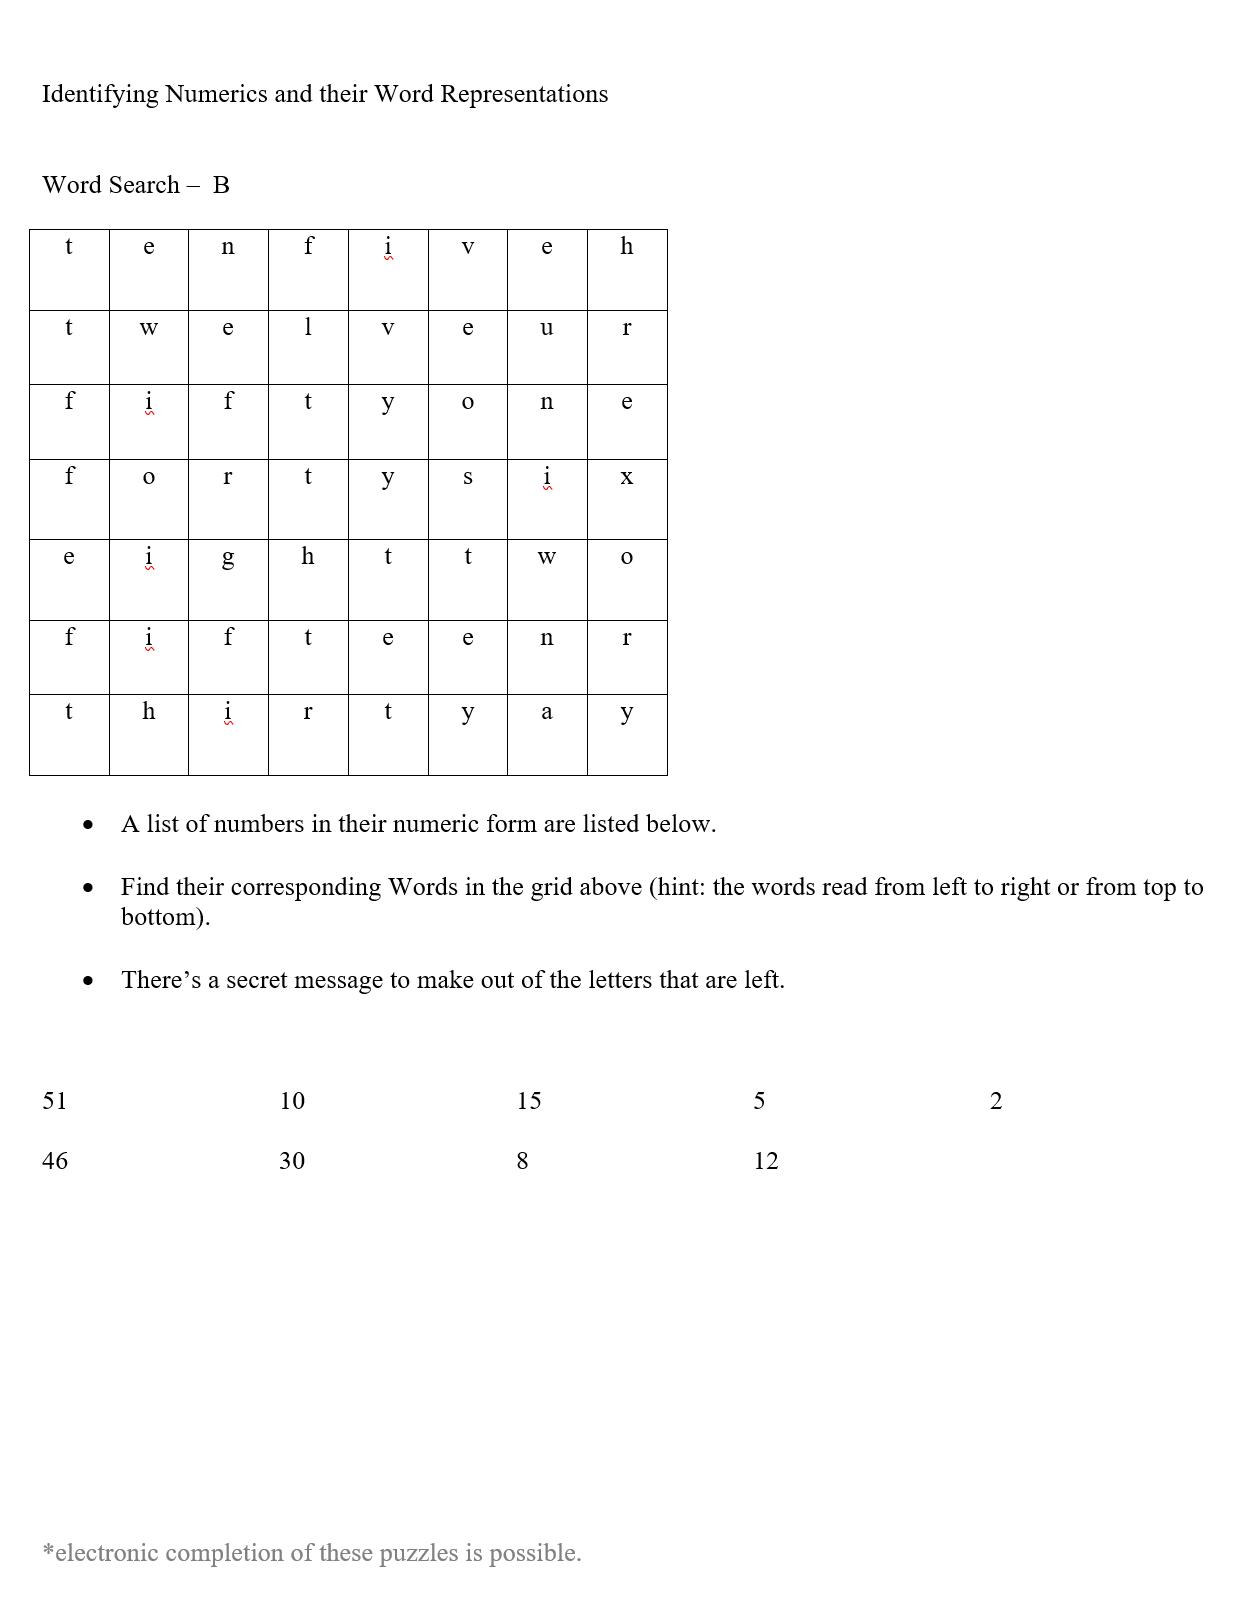 word searches re_ finding number word representations pg 2 of 4